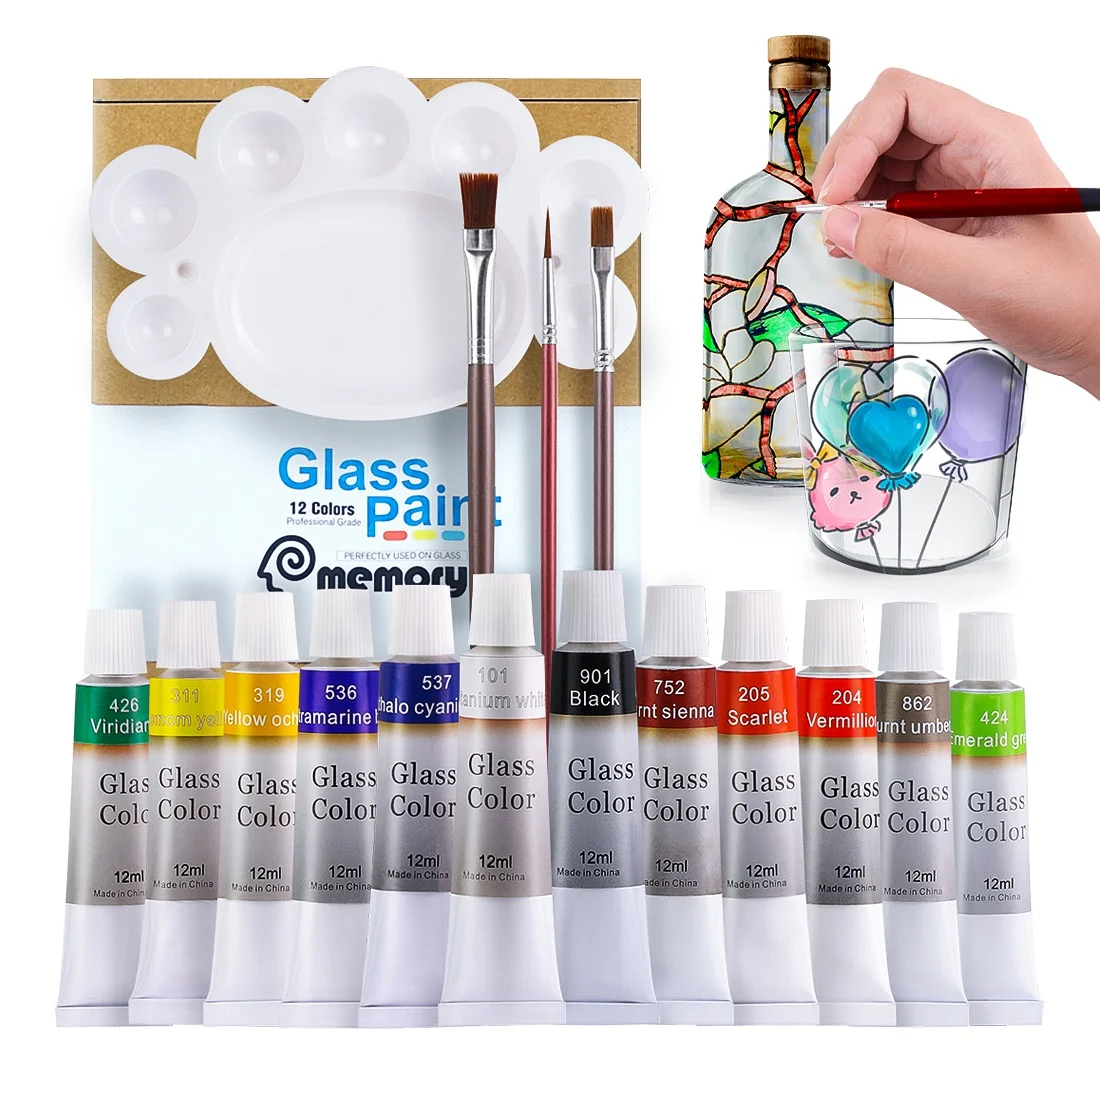 Colorful Fabric Paint Set for Clothes with 6 Brushes, 1 Palette